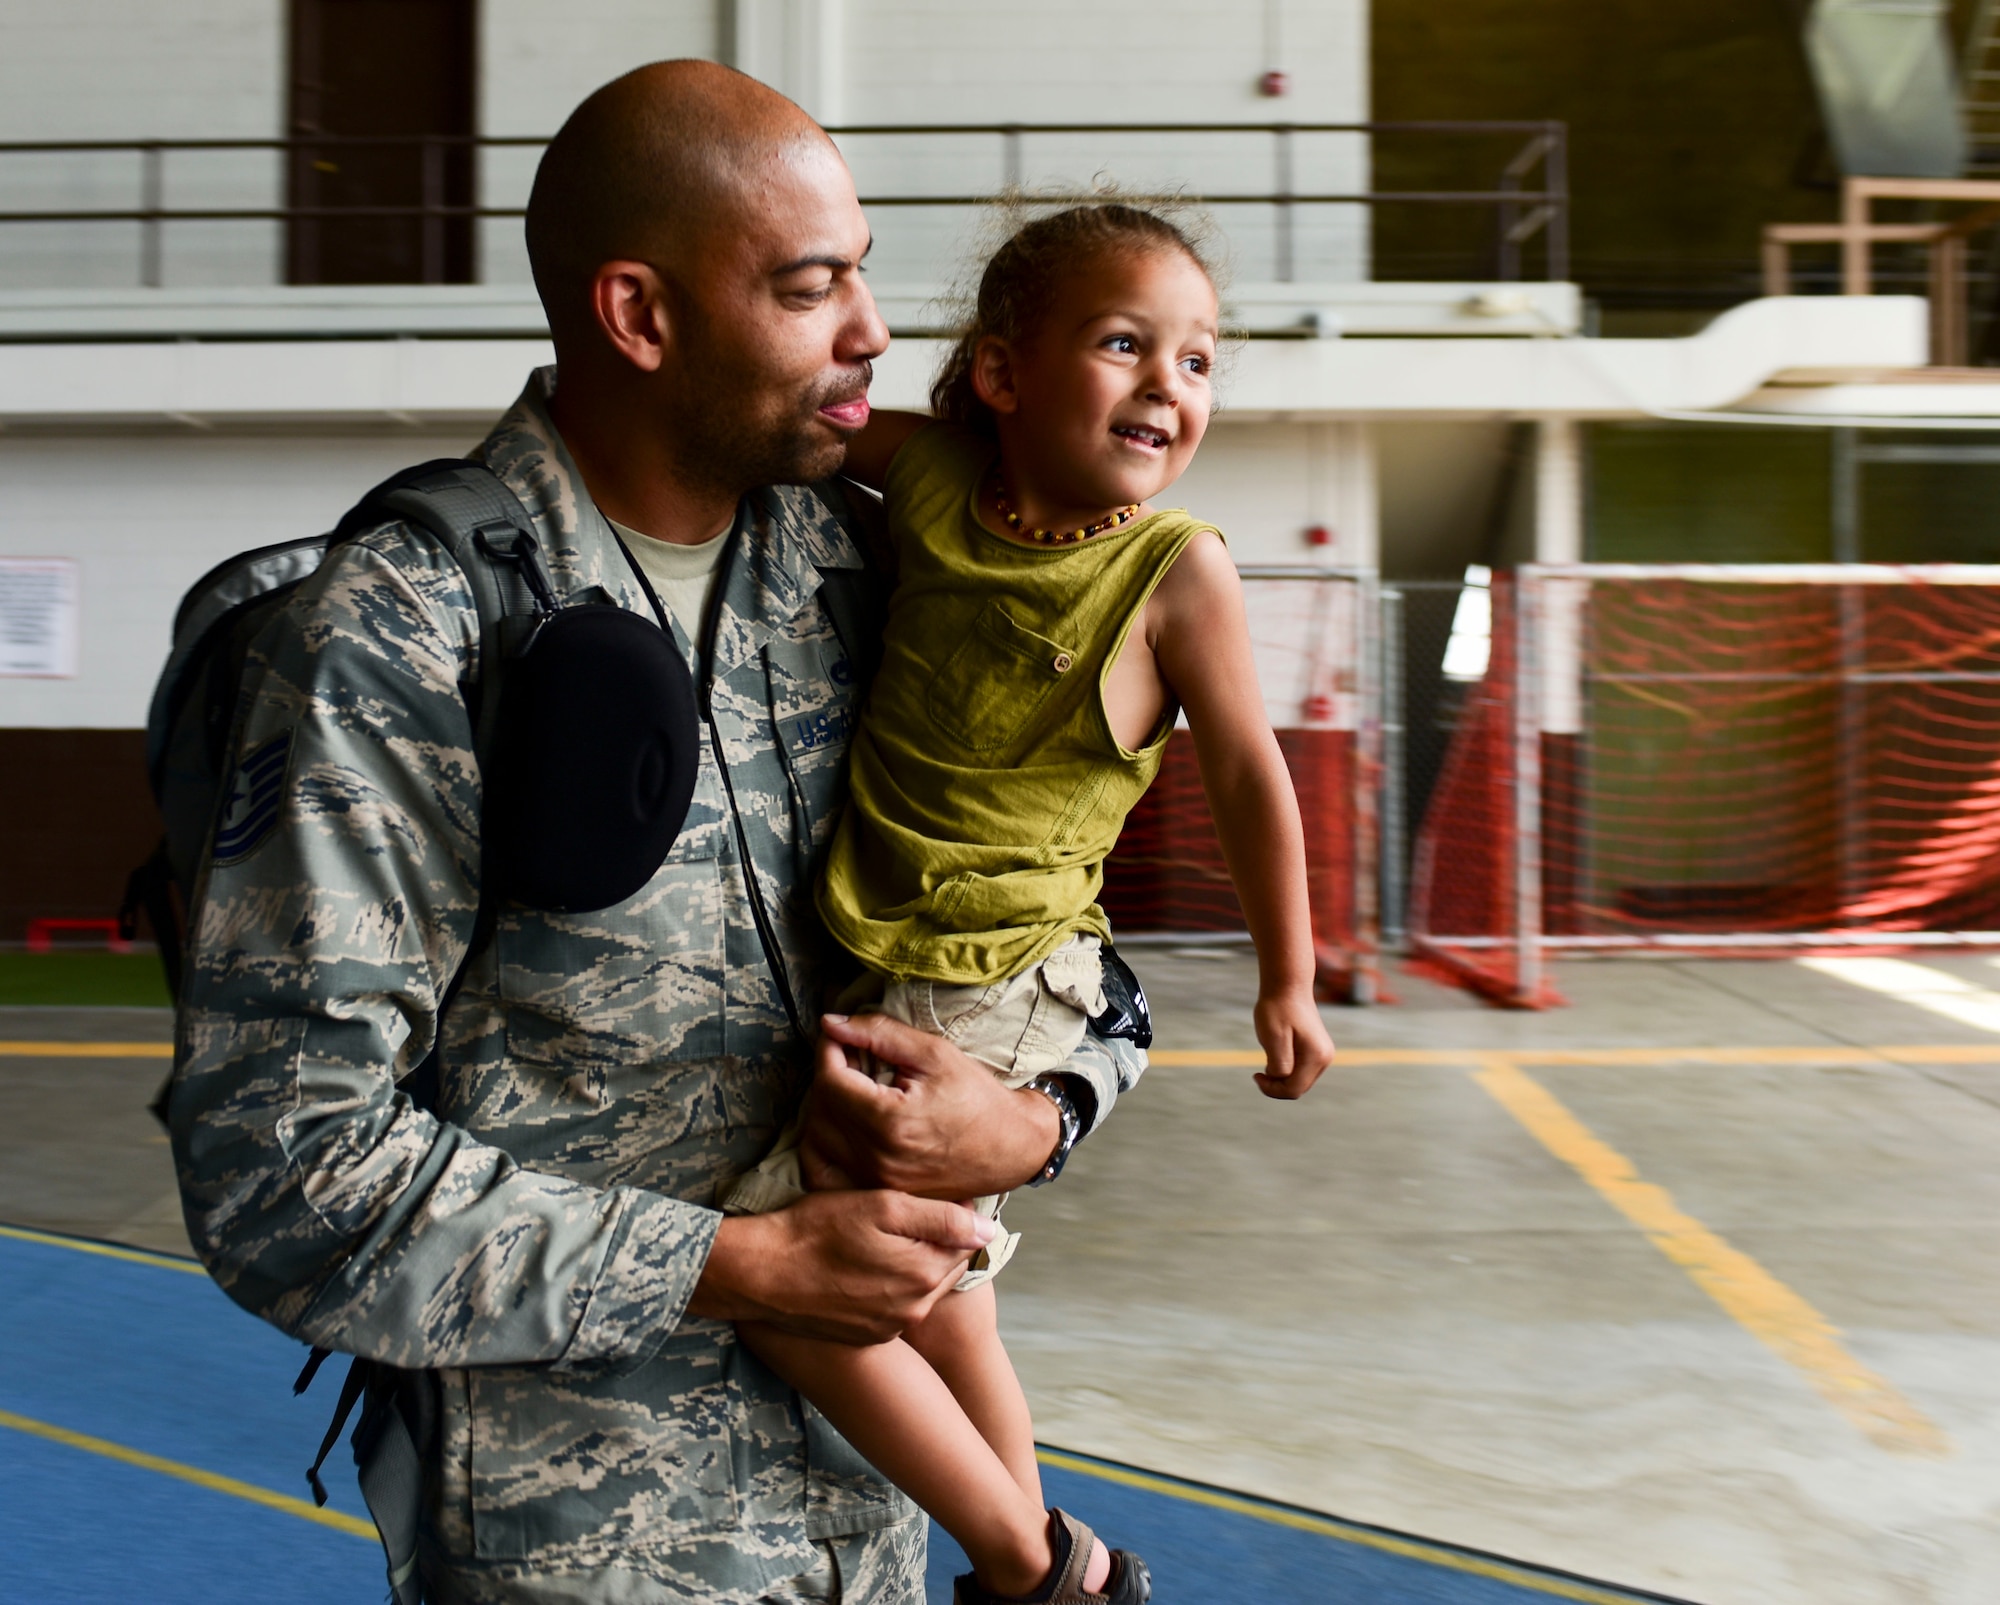 Tech Sgt. Eric Clayborn, an aircraft fuels craftsman assigned to the 28th Maintenance Squadron, holds his three-year old son, Zion, after returning from Red Flag 17-3, July 29, 2017. Red Flag is a joint-exercise that occurs at Nellis Air Force Base, Nevada, and includes air-to-air and air-to-ground scenarios to provide aircrews with a realistic combat environment. (U.S. Air Force photo by Airman 1st Class Randahl J. Jenson)  